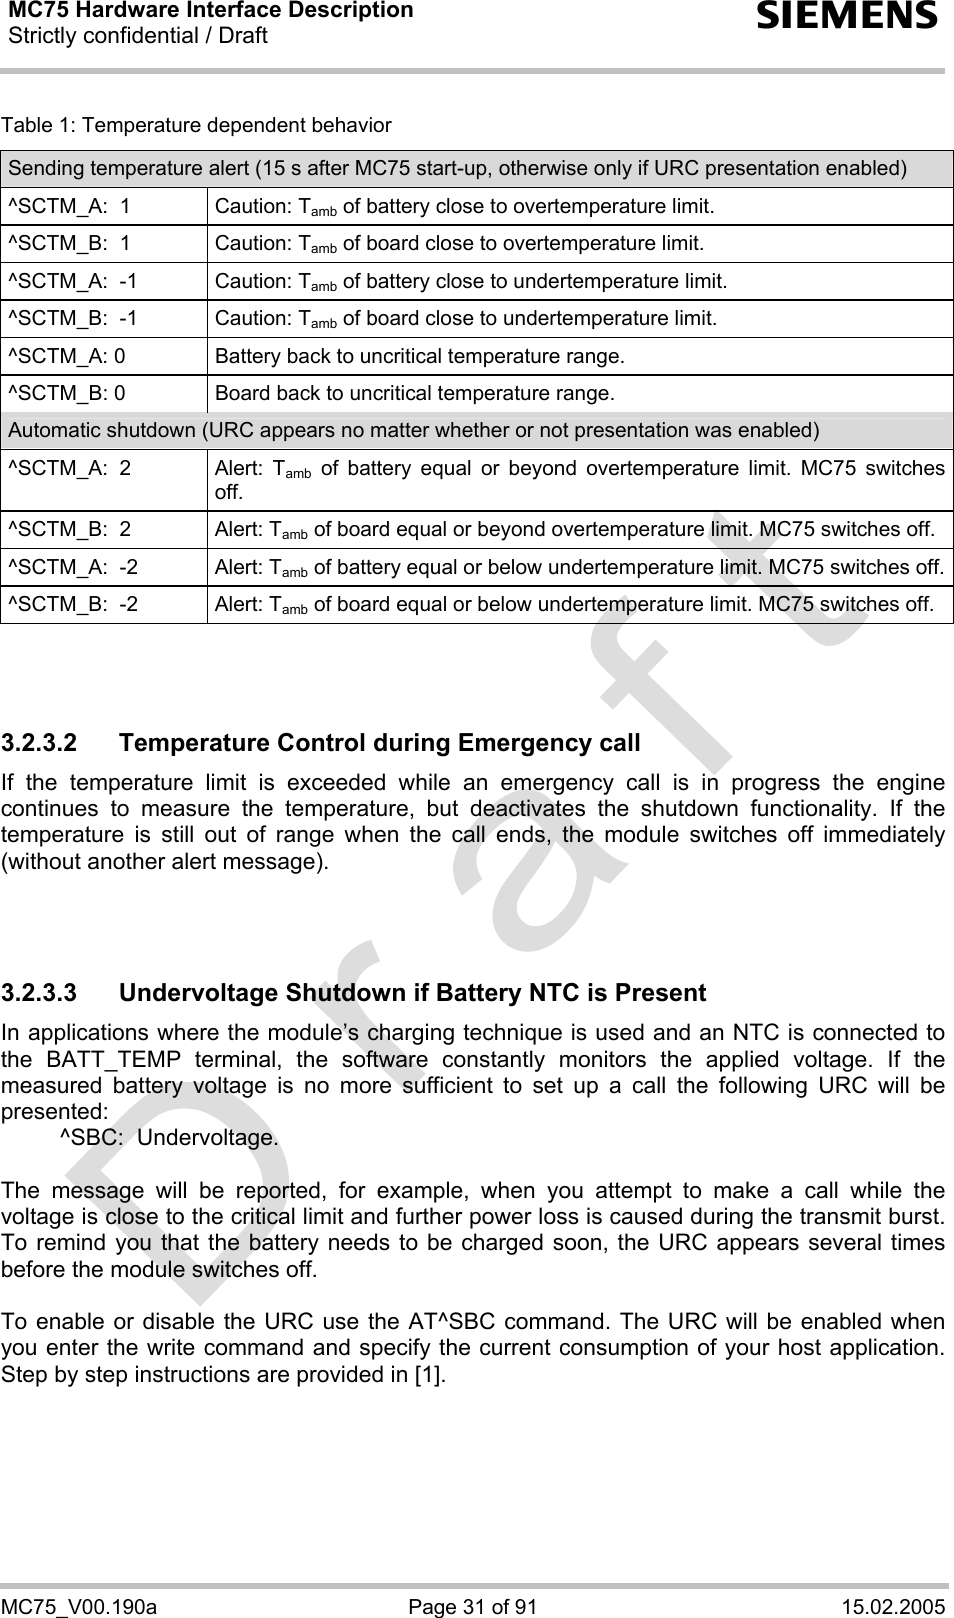 MC75 Hardware Interface Description Strictly confidential / Draft  s MC75_V00.190a  Page 31 of 91  15.02.2005 Table 1: Temperature dependent behavior Sending temperature alert (15 s after MC75 start-up, otherwise only if URC presentation enabled) ^SCTM_A:  1  Caution: Tamb of battery close to overtemperature limit. ^SCTM_B:  1  Caution: Tamb of board close to overtemperature limit. ^SCTM_A:  -1  Caution: Tamb of battery close to undertemperature limit. ^SCTM_B:  -1  Caution: Tamb of board close to undertemperature limit. ^SCTM_A: 0  Battery back to uncritical temperature range. ^SCTM_B: 0  Board back to uncritical temperature range. Automatic shutdown (URC appears no matter whether or not presentation was enabled) ^SCTM_A:  2  Alert:  Tamb of battery equal or beyond overtemperature limit. MC75 switches off. ^SCTM_B:  2  Alert: Tamb of board equal or beyond overtemperature limit. MC75 switches off. ^SCTM_A:  -2  Alert: Tamb of battery equal or below undertemperature limit. MC75 switches off.^SCTM_B:  -2  Alert: Tamb of board equal or below undertemperature limit. MC75 switches off.    3.2.3.2  Temperature Control during Emergency call If the temperature limit is exceeded while an emergency call is in progress the engine continues to measure the temperature, but deactivates the shutdown functionality. If the temperature is still out of range when the call ends, the module switches off immediately (without another alert message).    3.2.3.3  Undervoltage Shutdown if Battery NTC is Present In applications where the module’s charging technique is used and an NTC is connected to the BATT_TEMP terminal, the software constantly monitors the applied voltage. If the measured battery voltage is no more sufficient to set up a call the following URC will be presented:    ^SBC:  Undervoltage.  The message will be reported, for example, when you attempt to make a call while the voltage is close to the critical limit and further power loss is caused during the transmit burst. To remind you that the battery needs to be charged soon, the URC appears several times before the module switches off.   To enable or disable the URC use the AT^SBC command. The URC will be enabled when you enter the write command and specify the current consumption of your host application. Step by step instructions are provided in [1].   